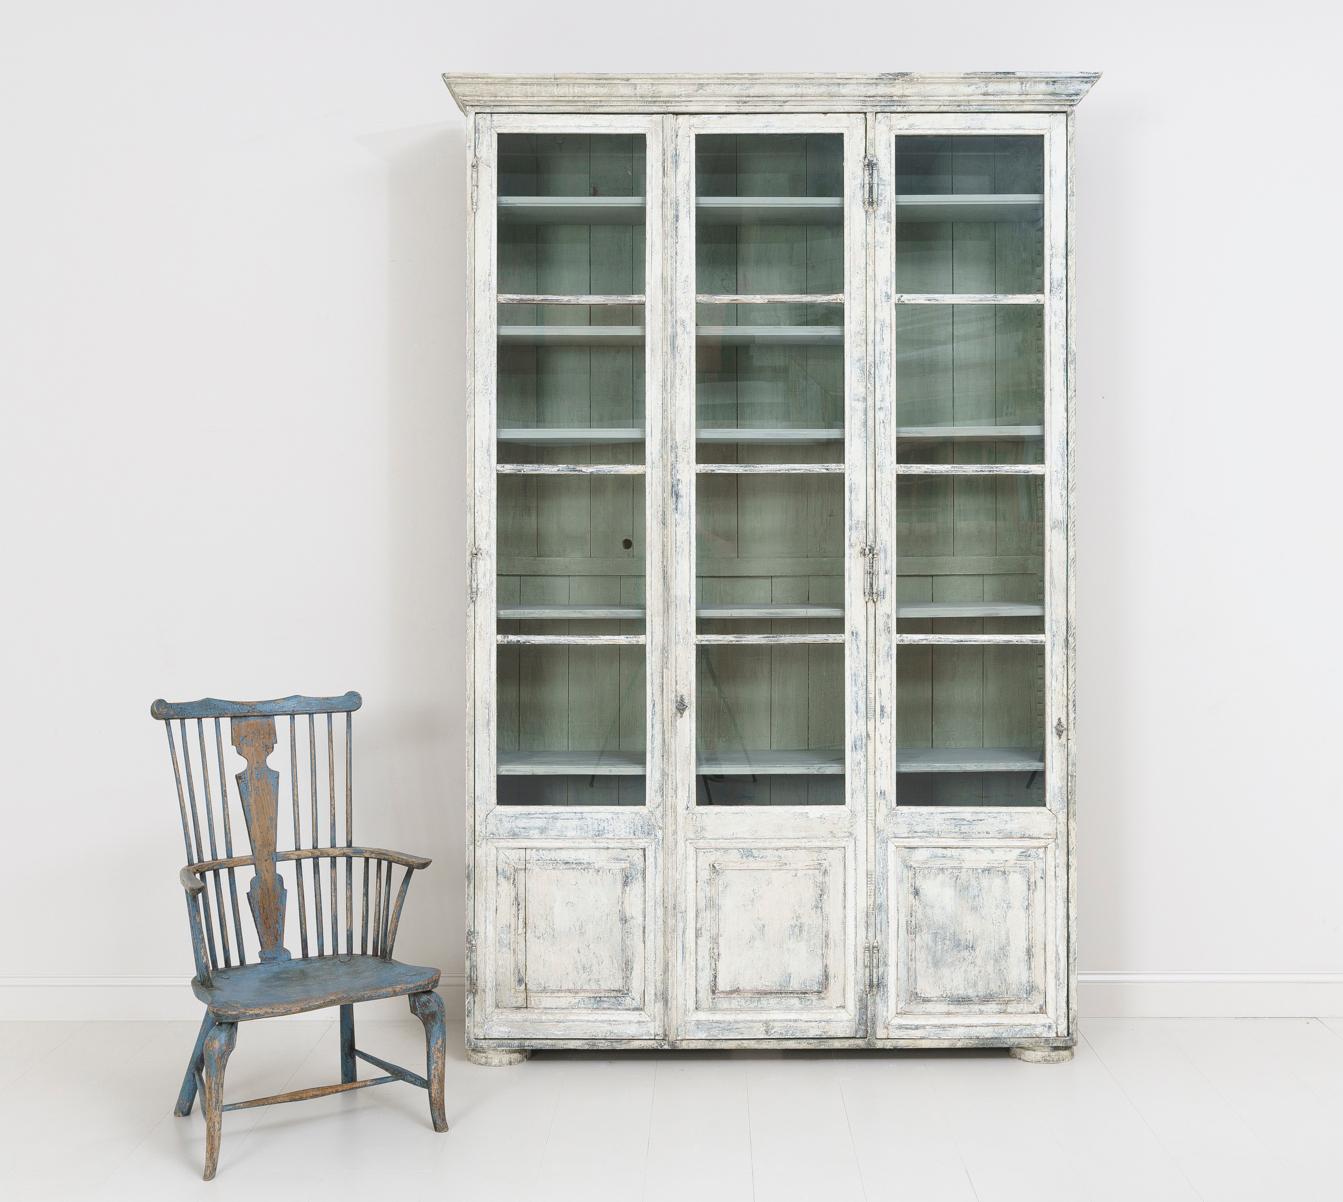 19th century French bibliothèque with original glass and adjustable shelves. This beautiful vitrine cabinet or bookcase is the perfect piece for almost any room. The exterior color is aged white with areas of blue and gray showing through. The